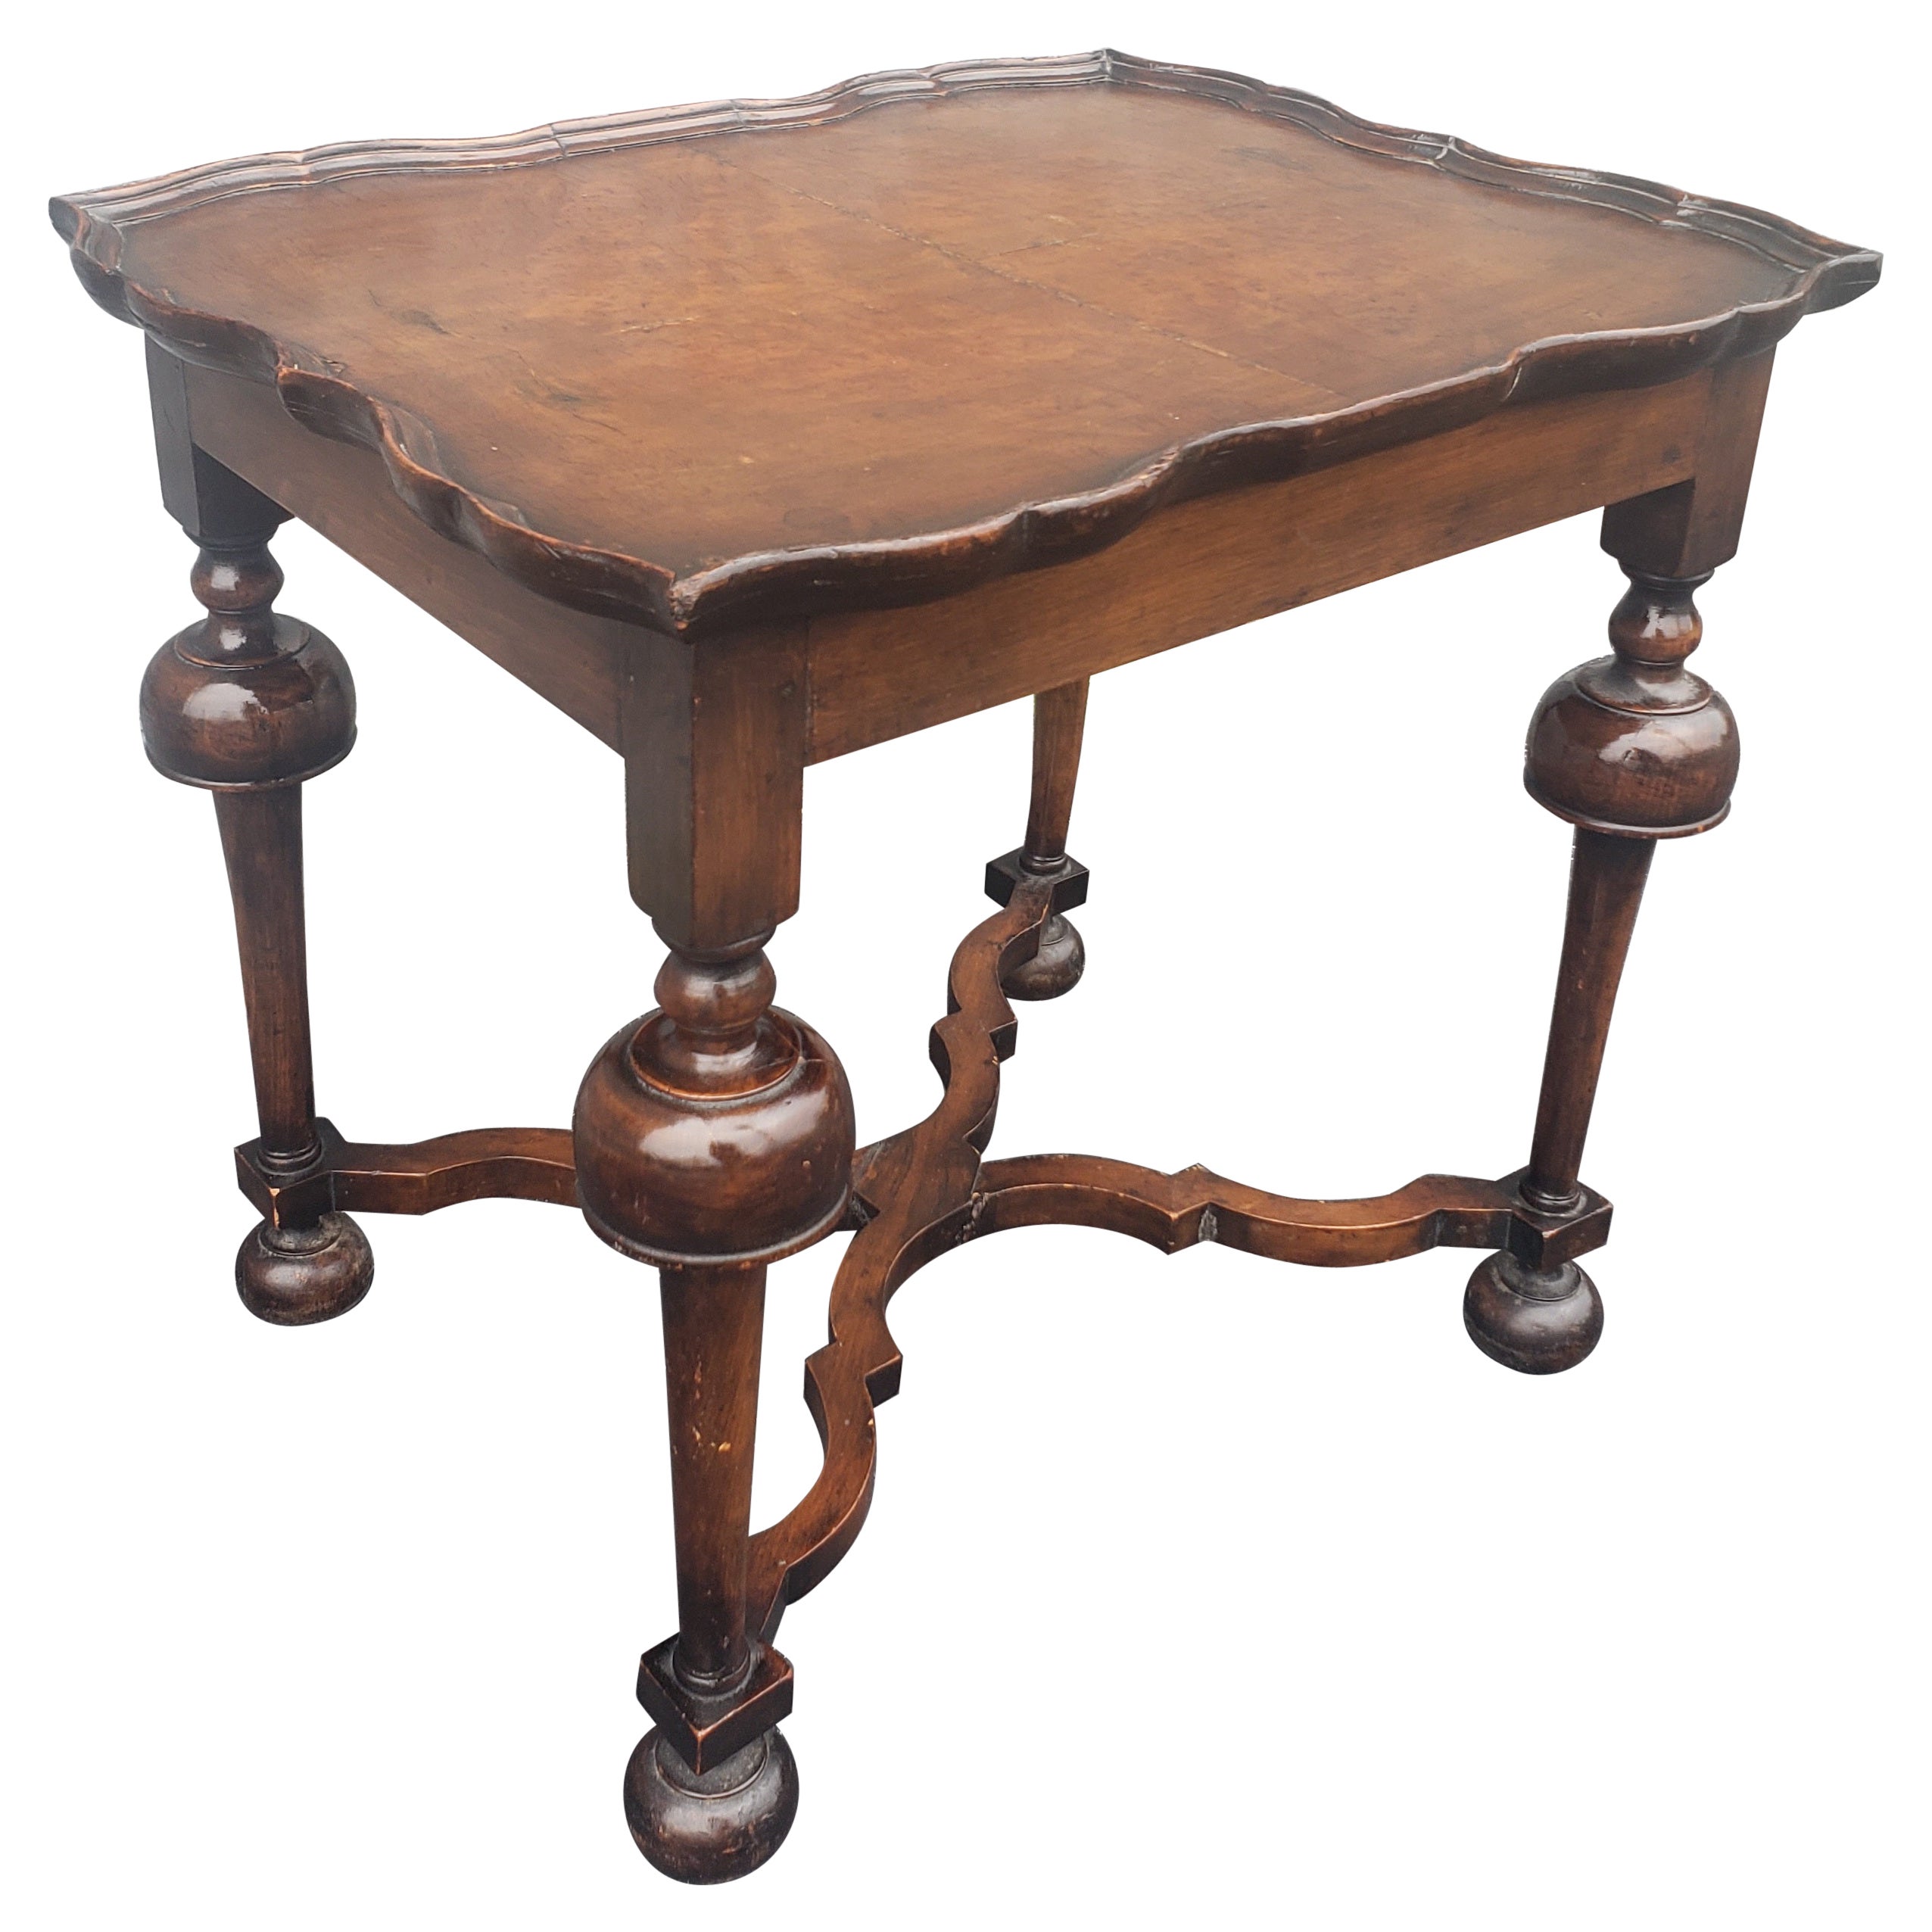 Early American William and Mary Walnut and Burl Side Table, circa 1890s